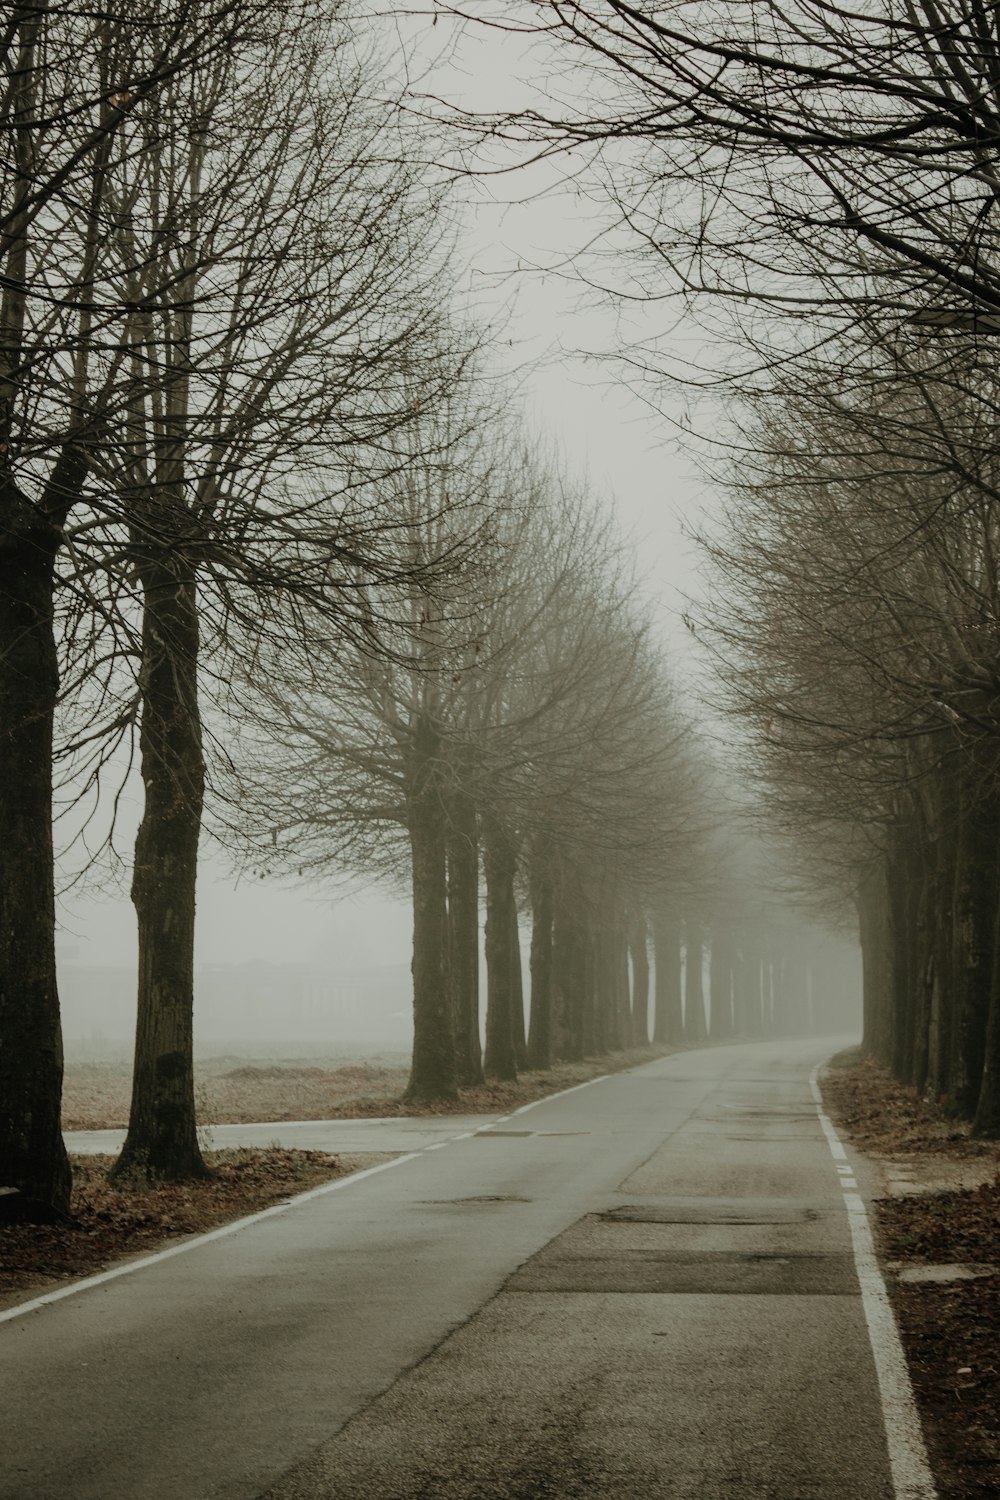 a foggy road lined with trees on both sides